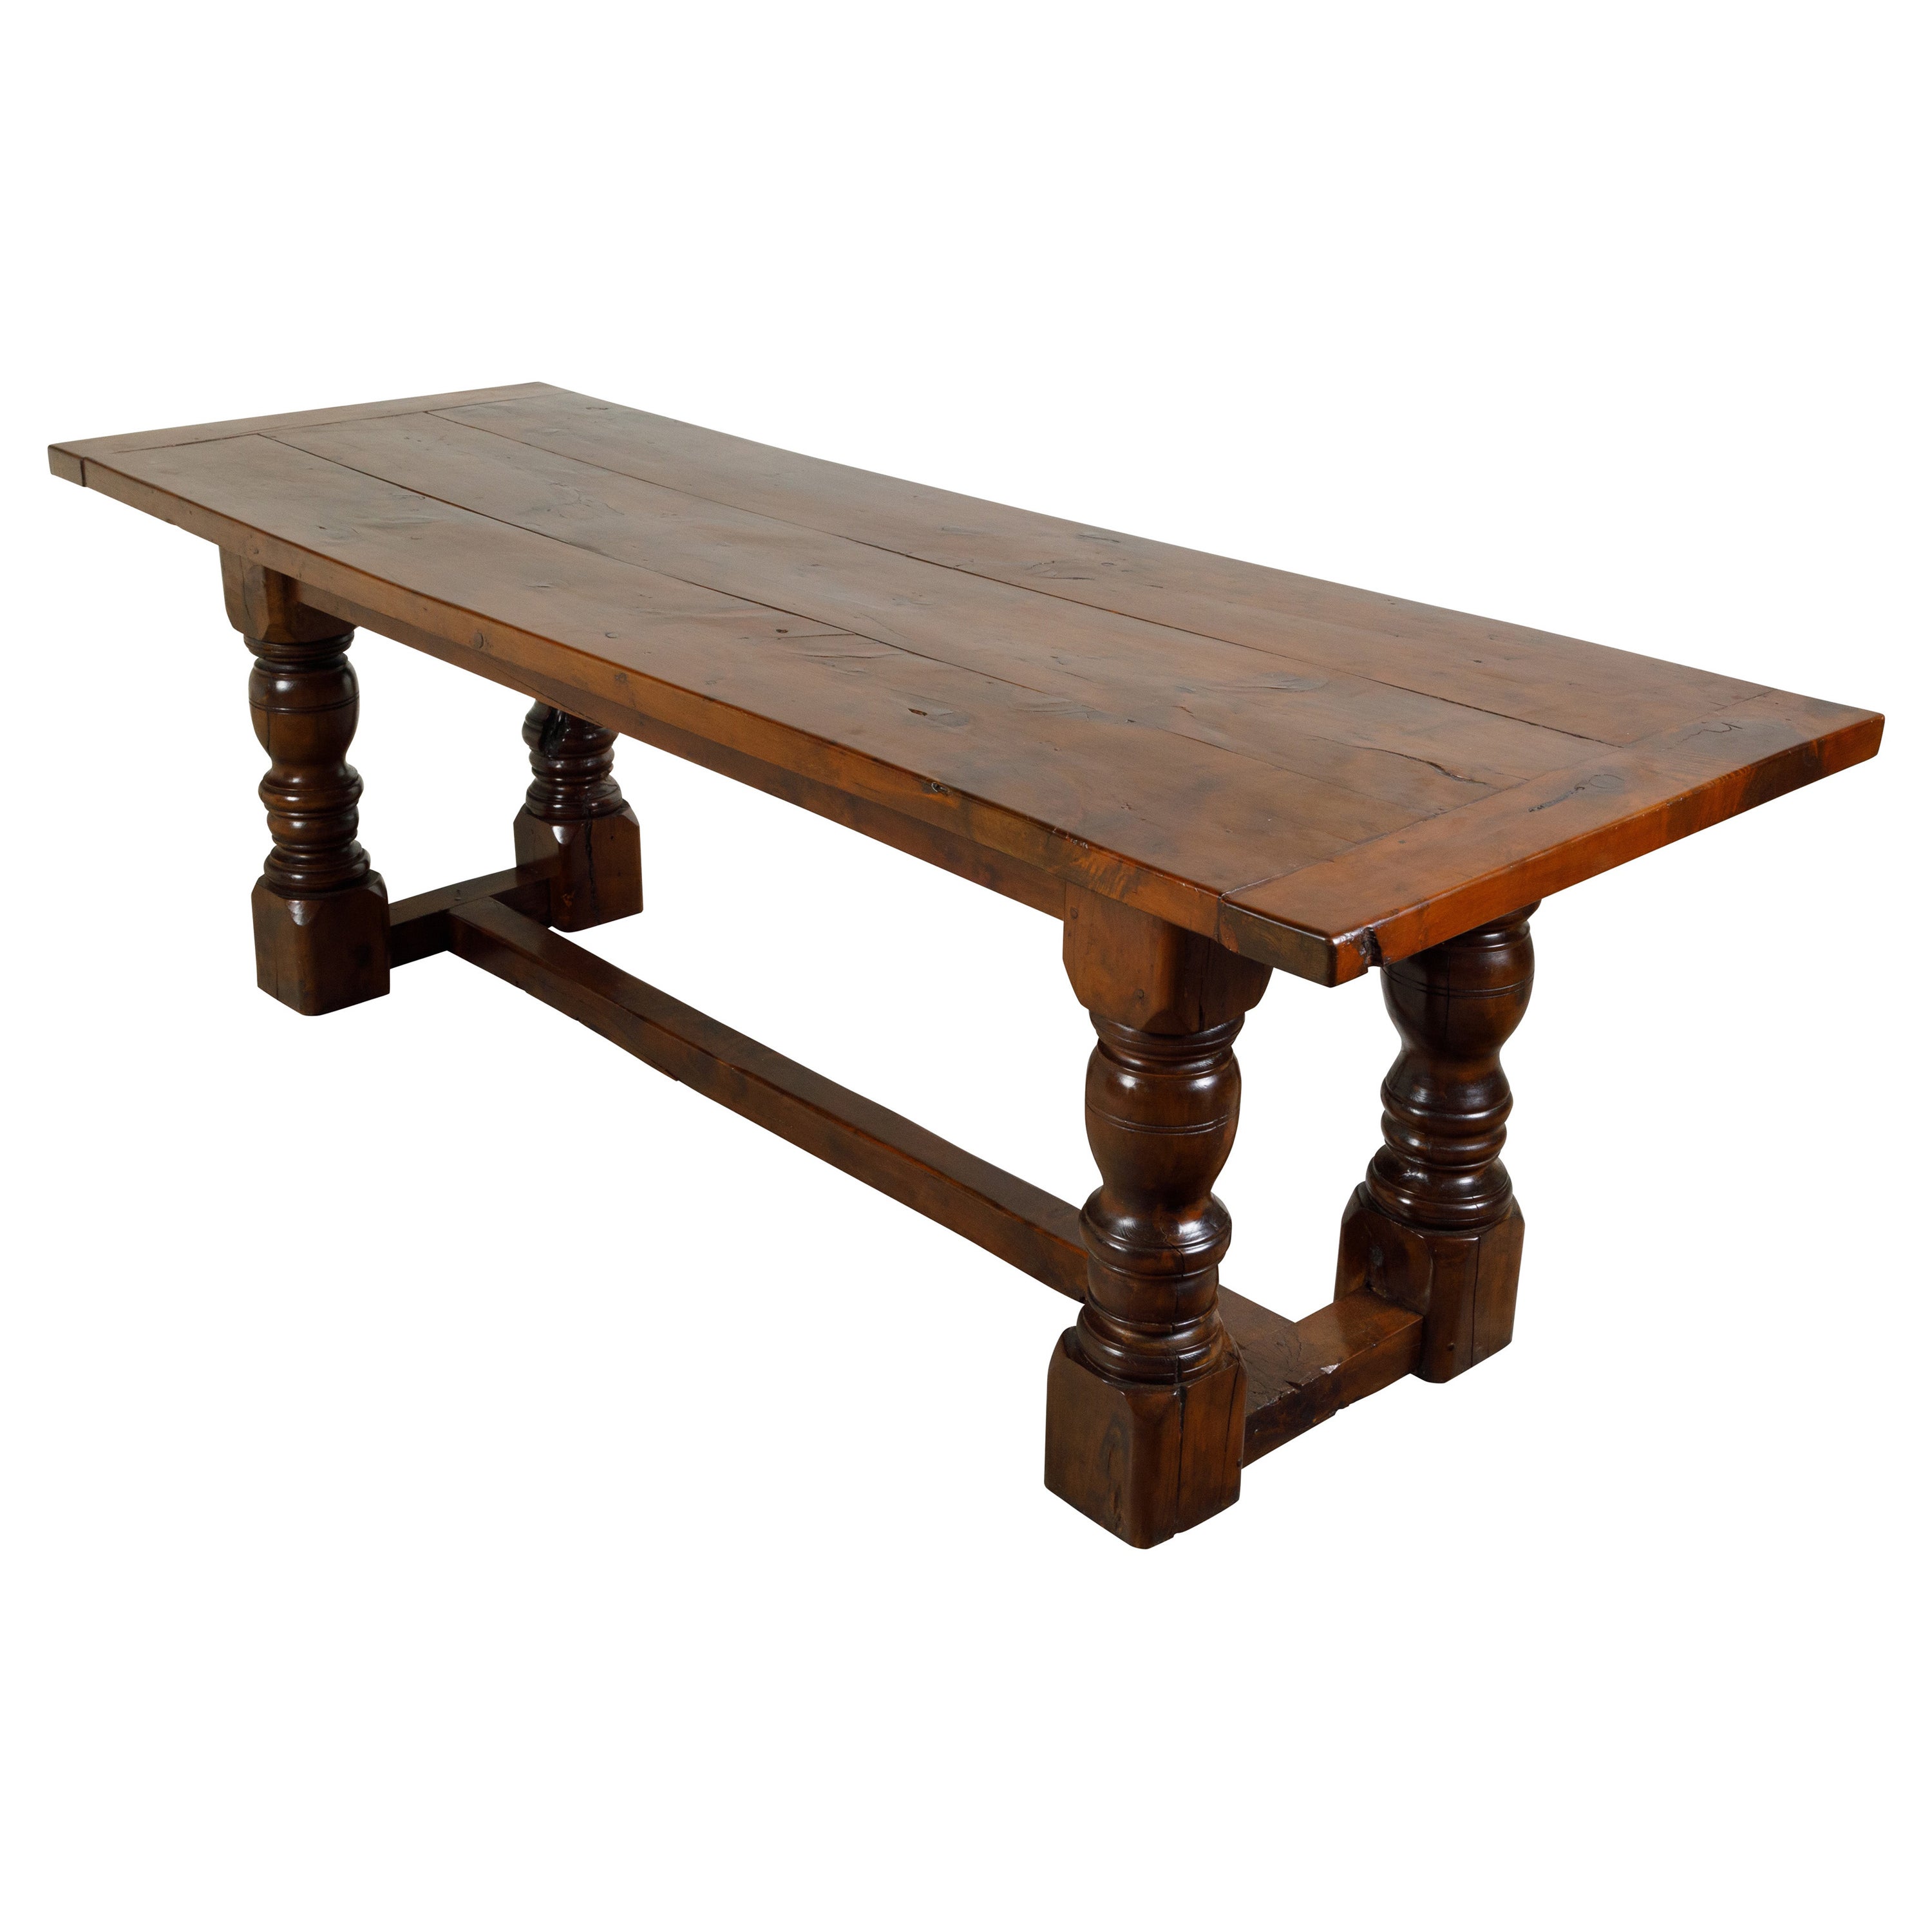 English 19th Century Walnut Dining Table with Turned Legs and H-Form Stretcher